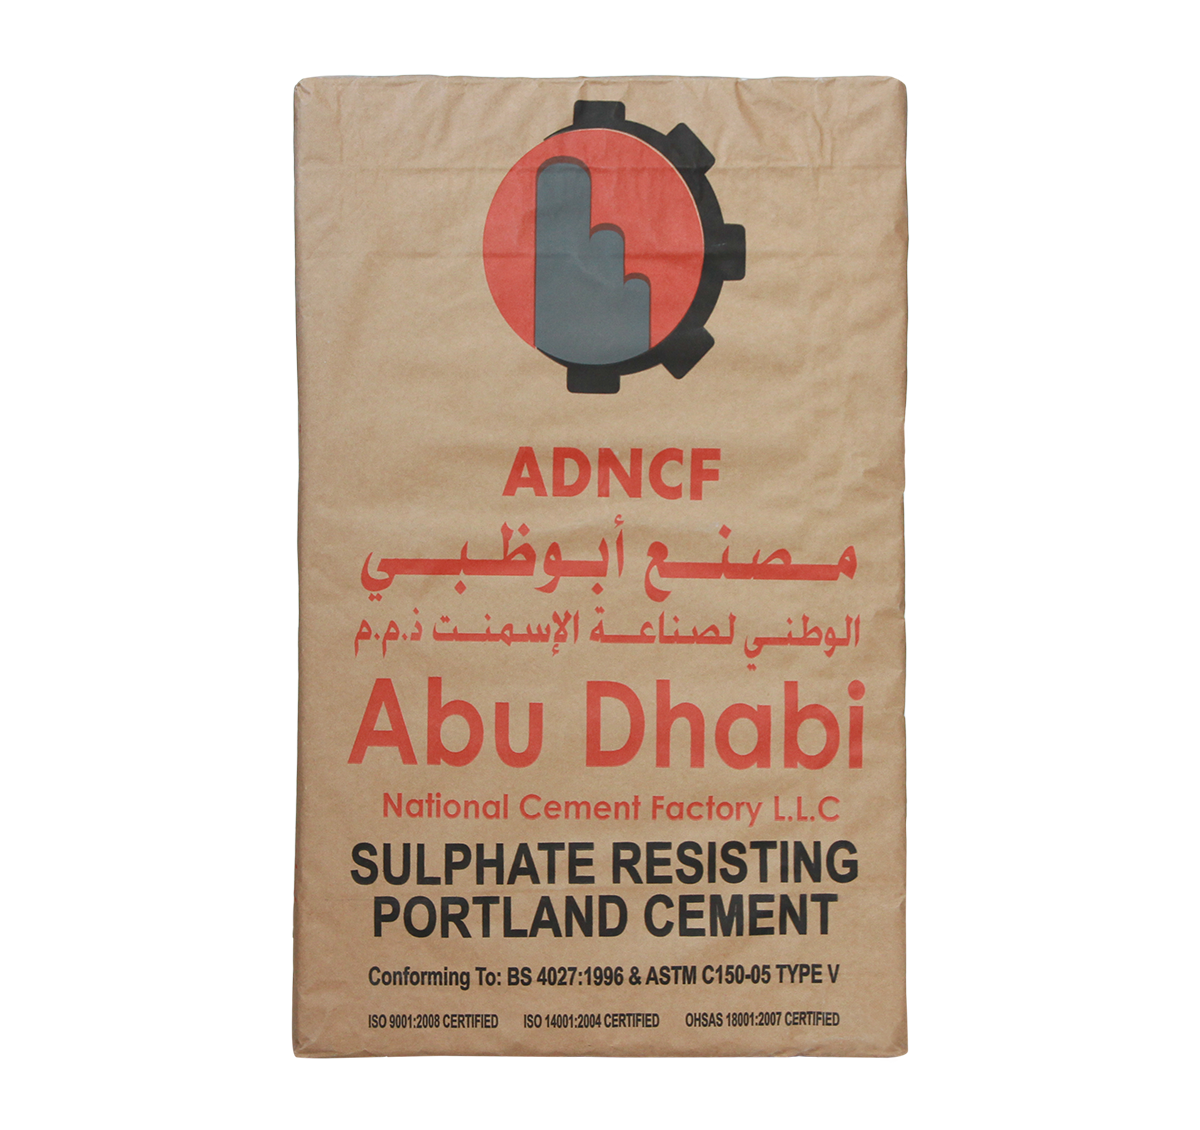 800Cement.com - Buy cement online, Cement price in dubai - Sulphate